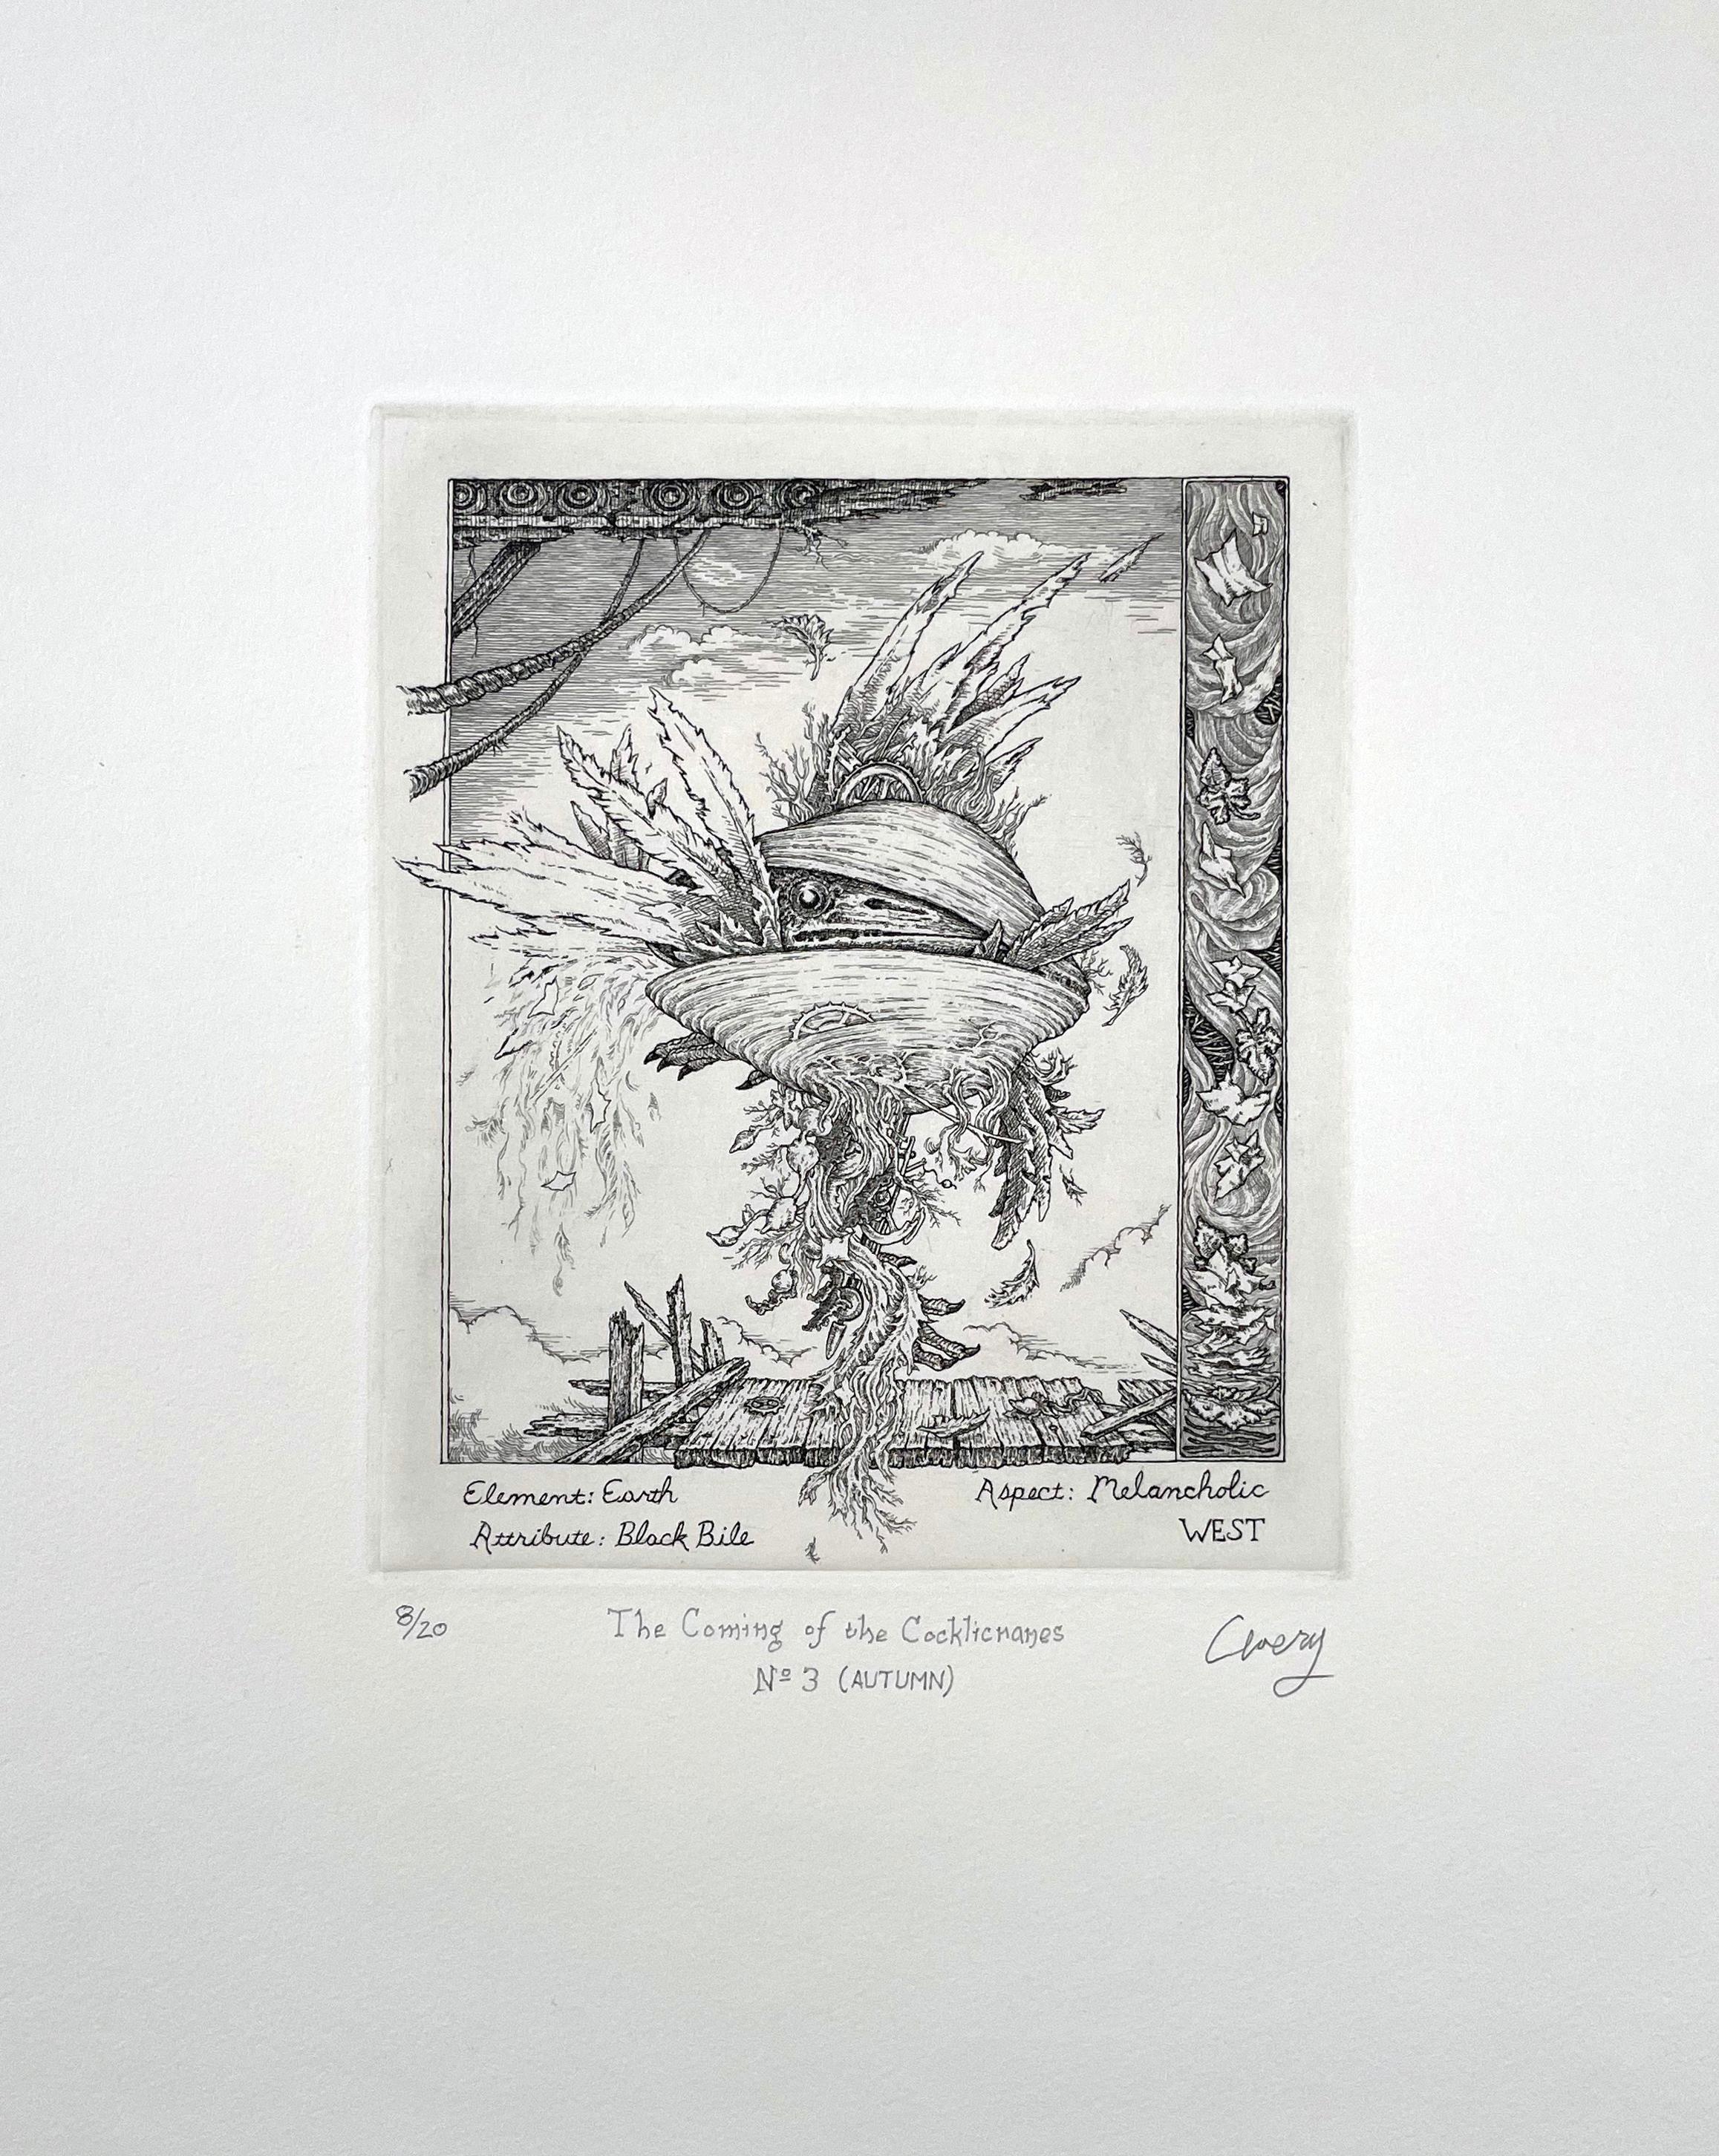 The Coming of the Cocklicranes, No. 3 (Autumn) - Print by David Avery